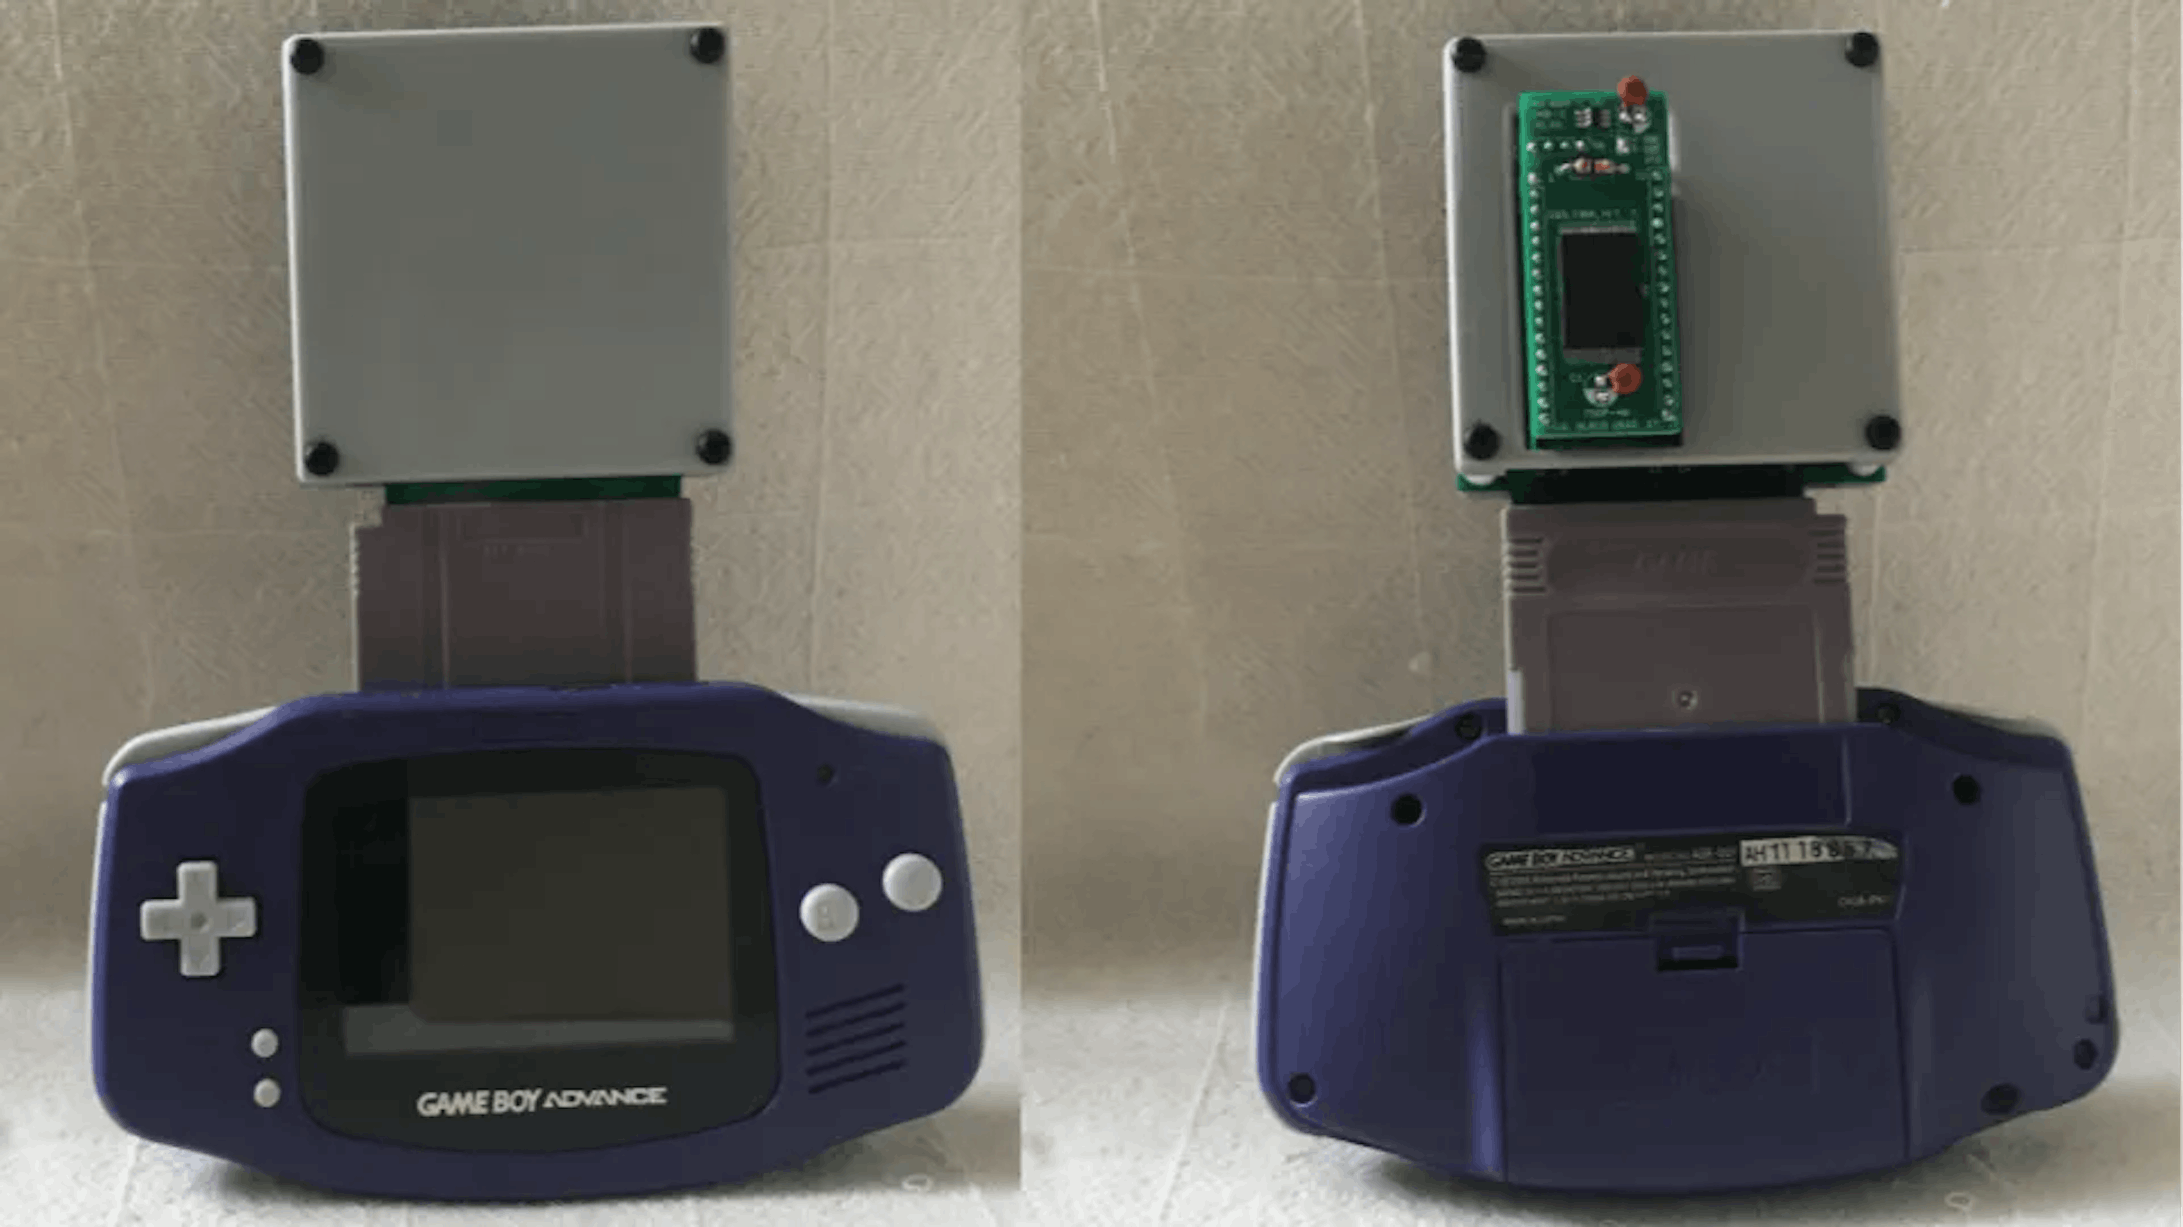 Squareboi Is Open Source Game Boy Cartridge System You Need - Hackster.io